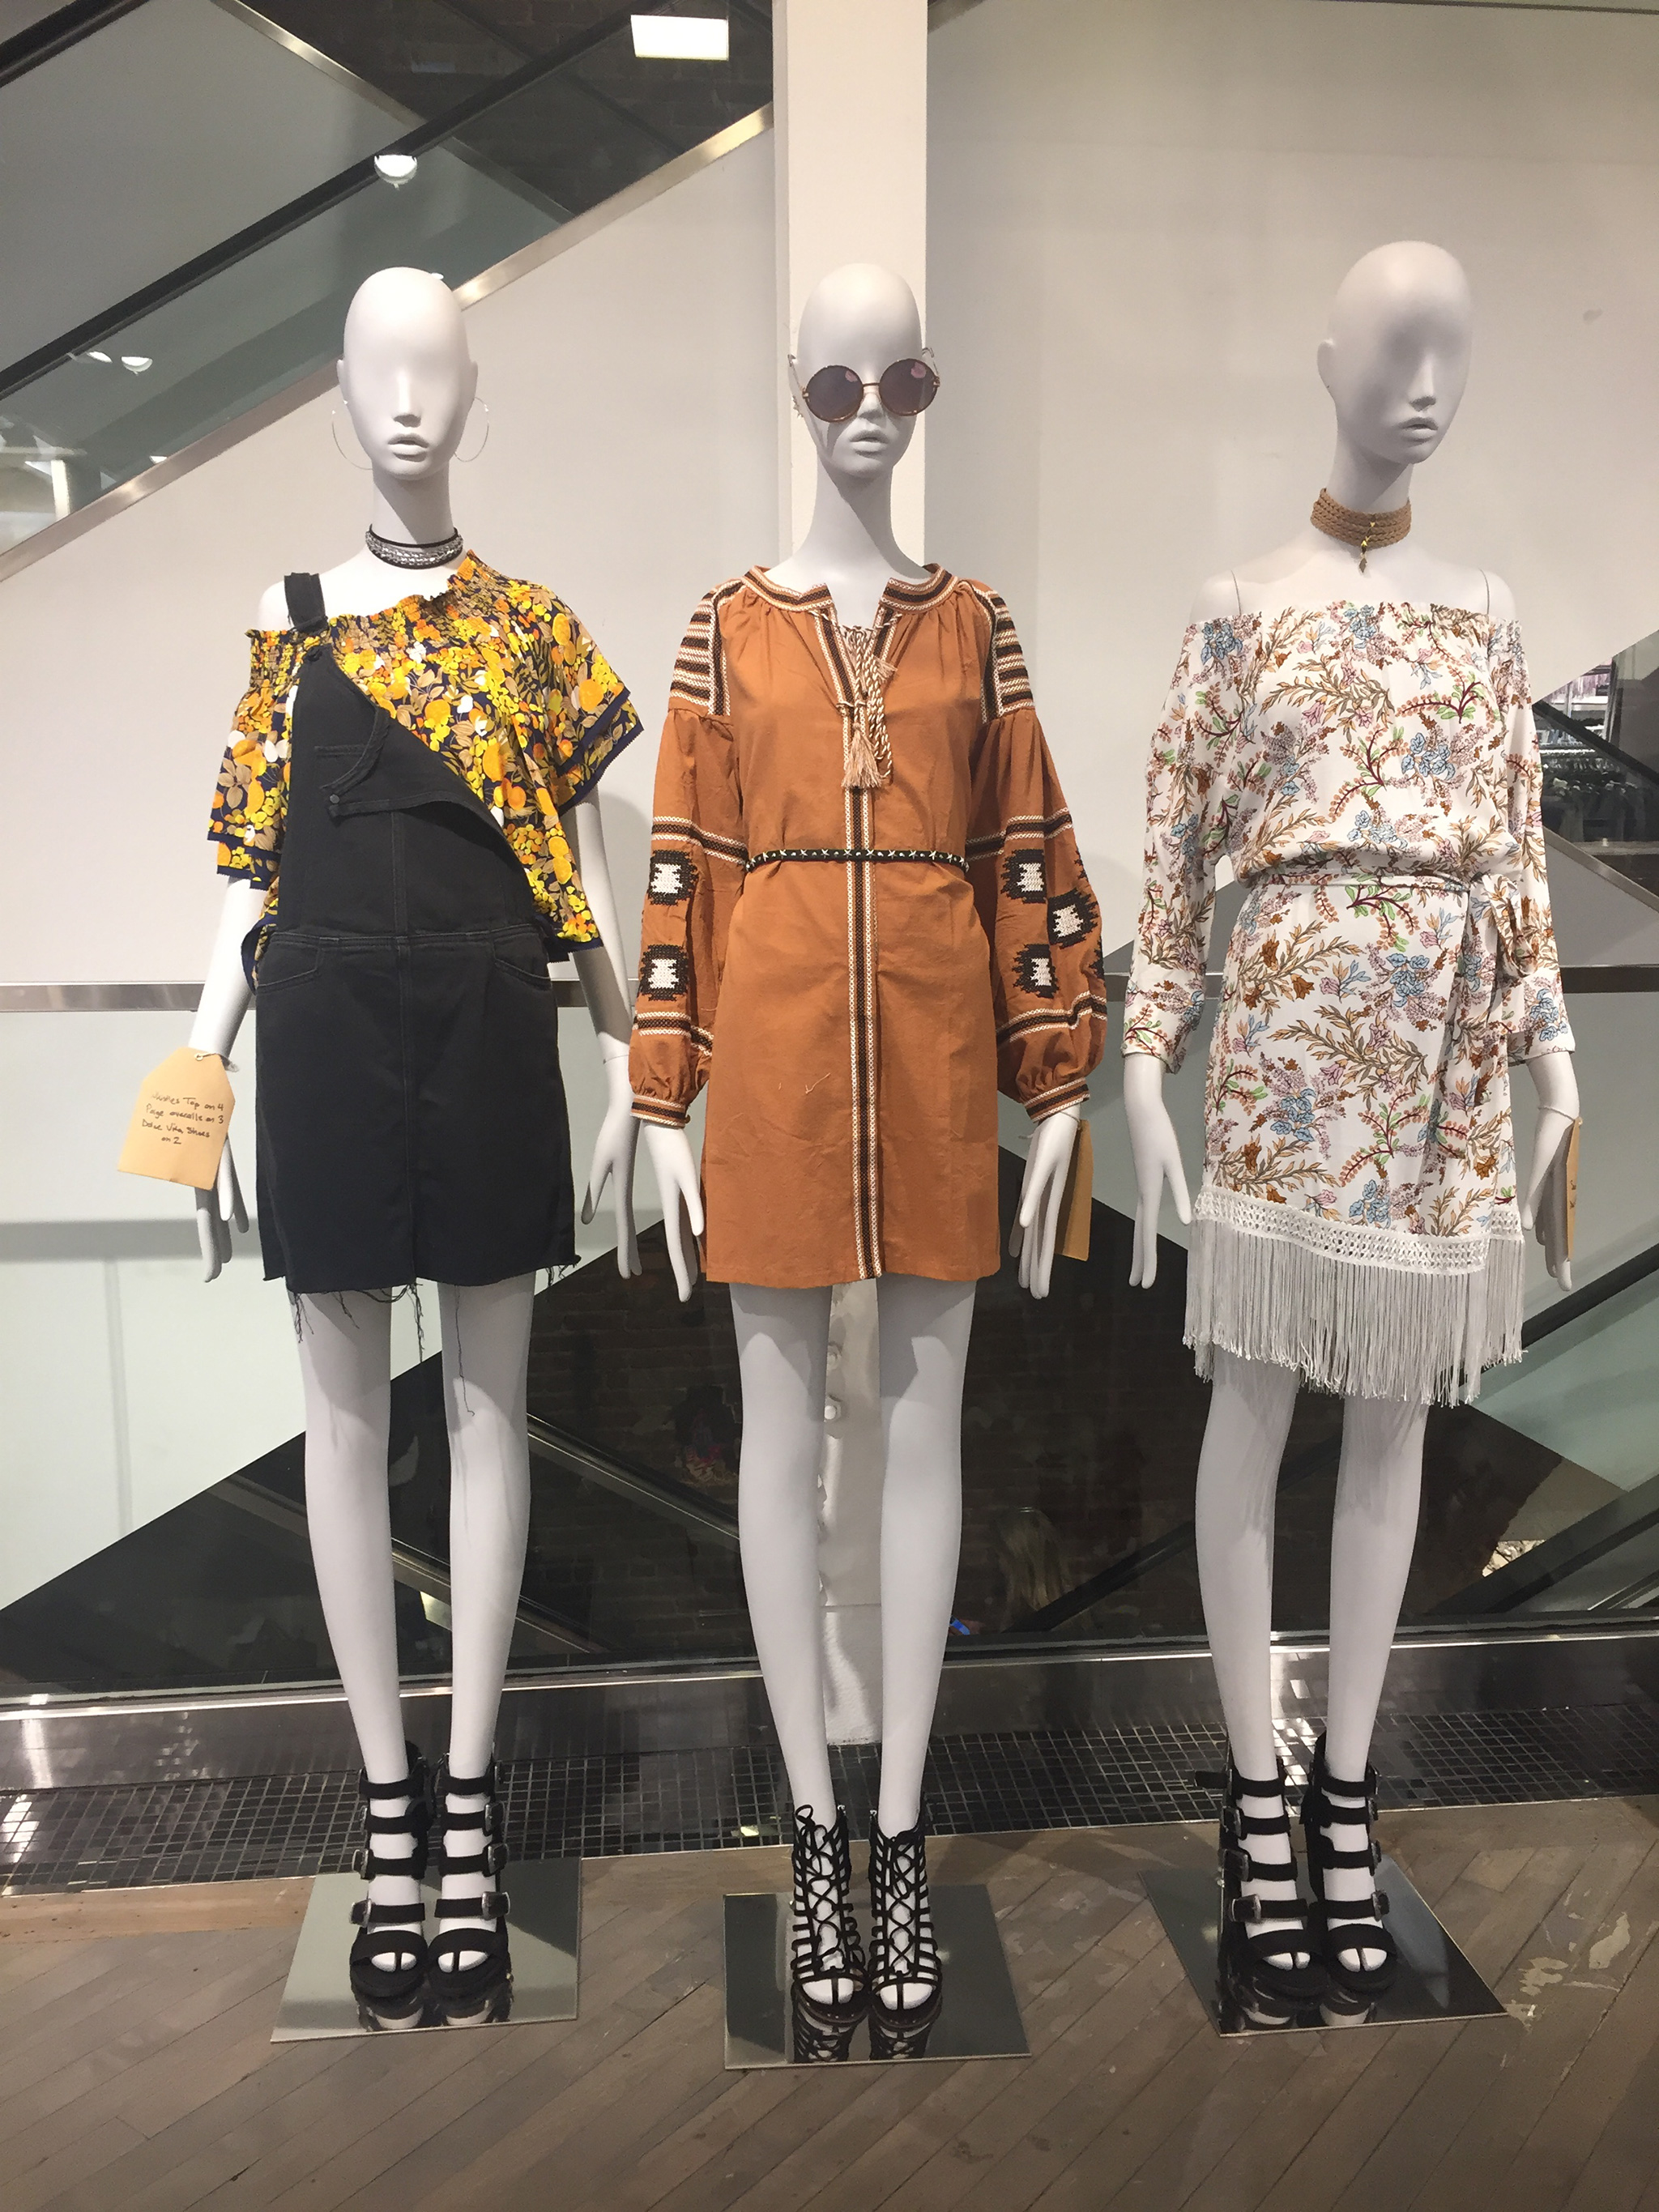 Festival Fashion | In-Store Trends at Bloomingdale’s - Fashion Trendsetter